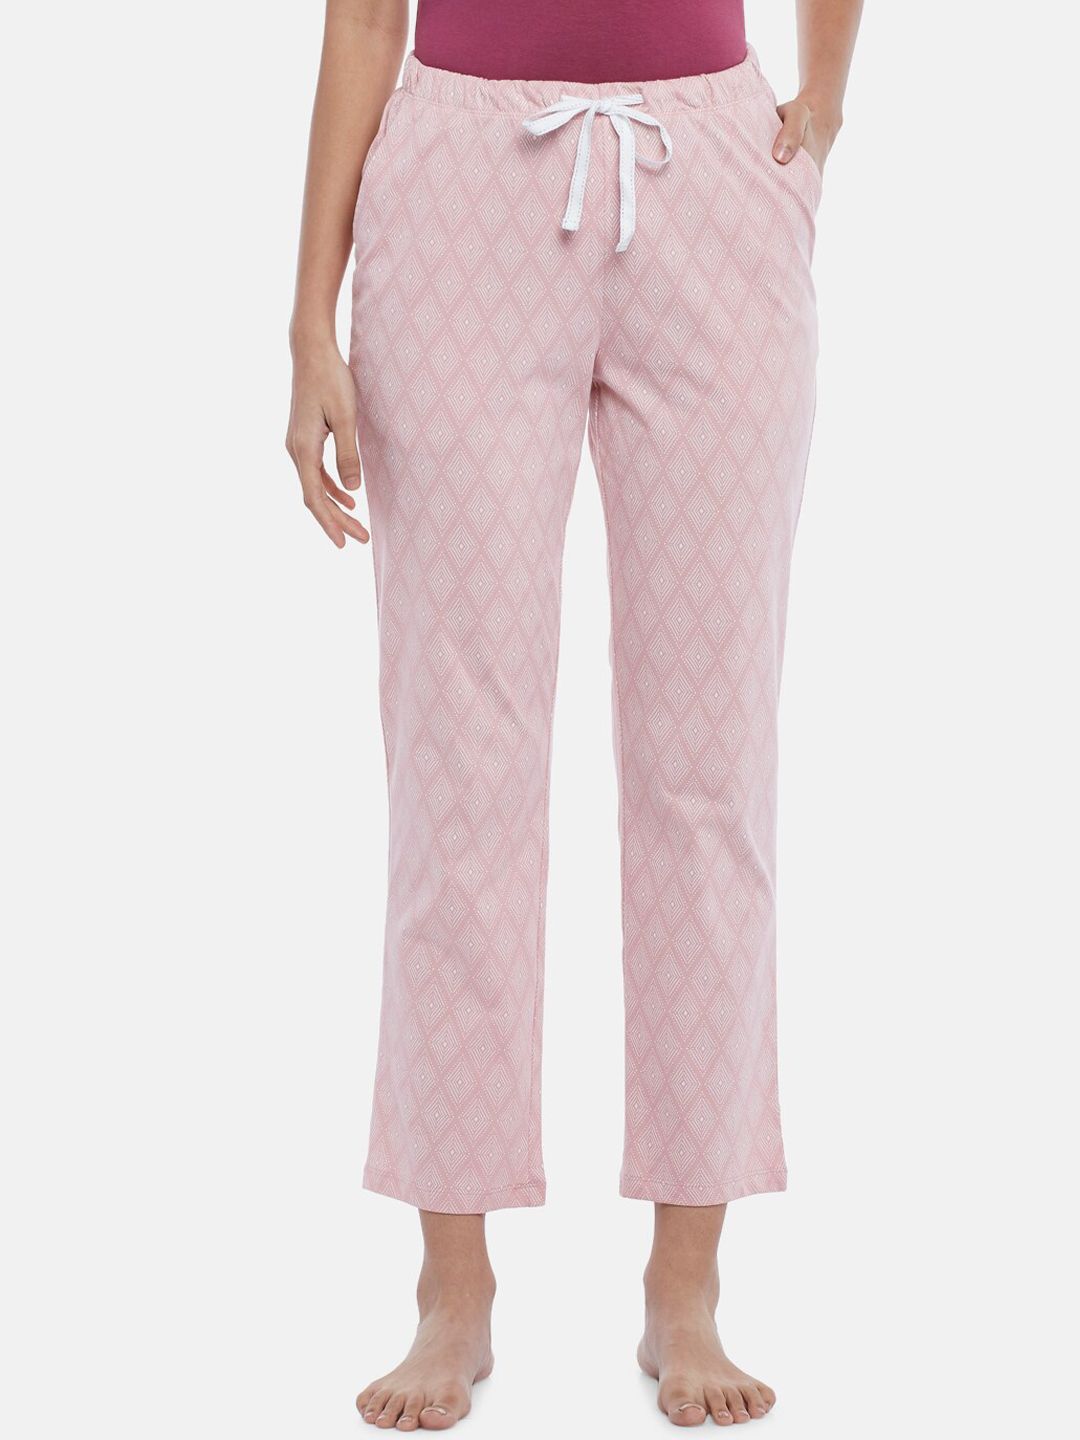 Dreamz by Pantaloons Pink Printed Cotton Lounge Pants Price in India